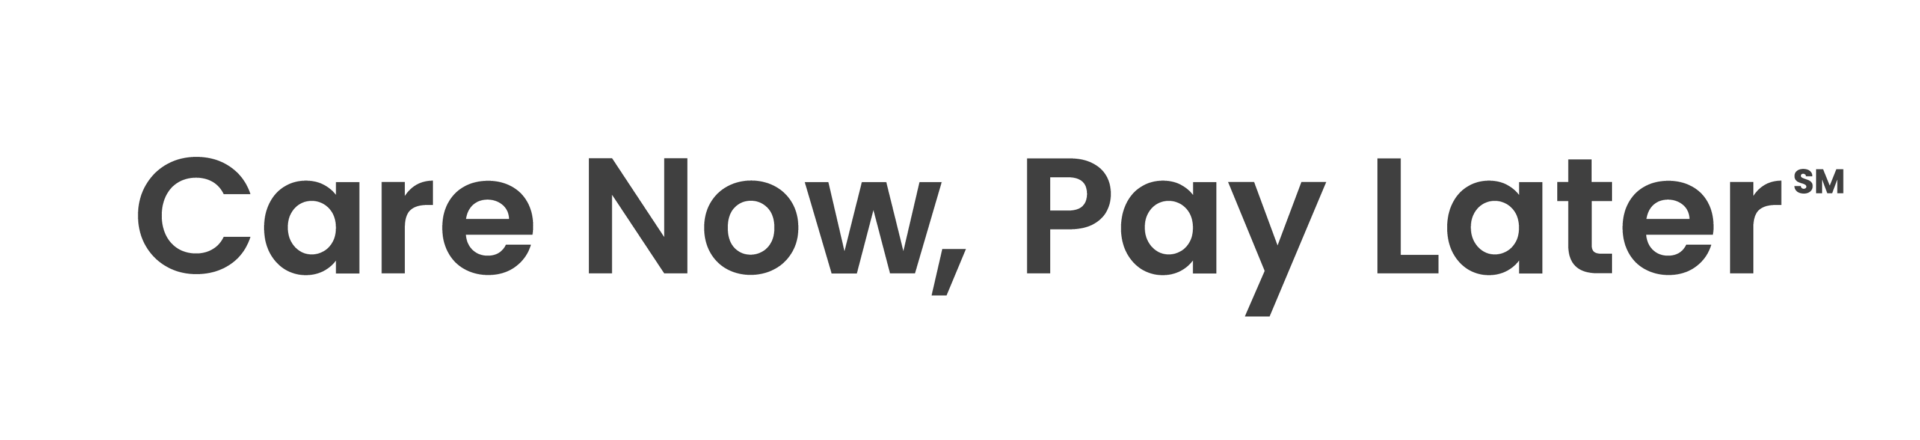 Care Now, Pay Later logo